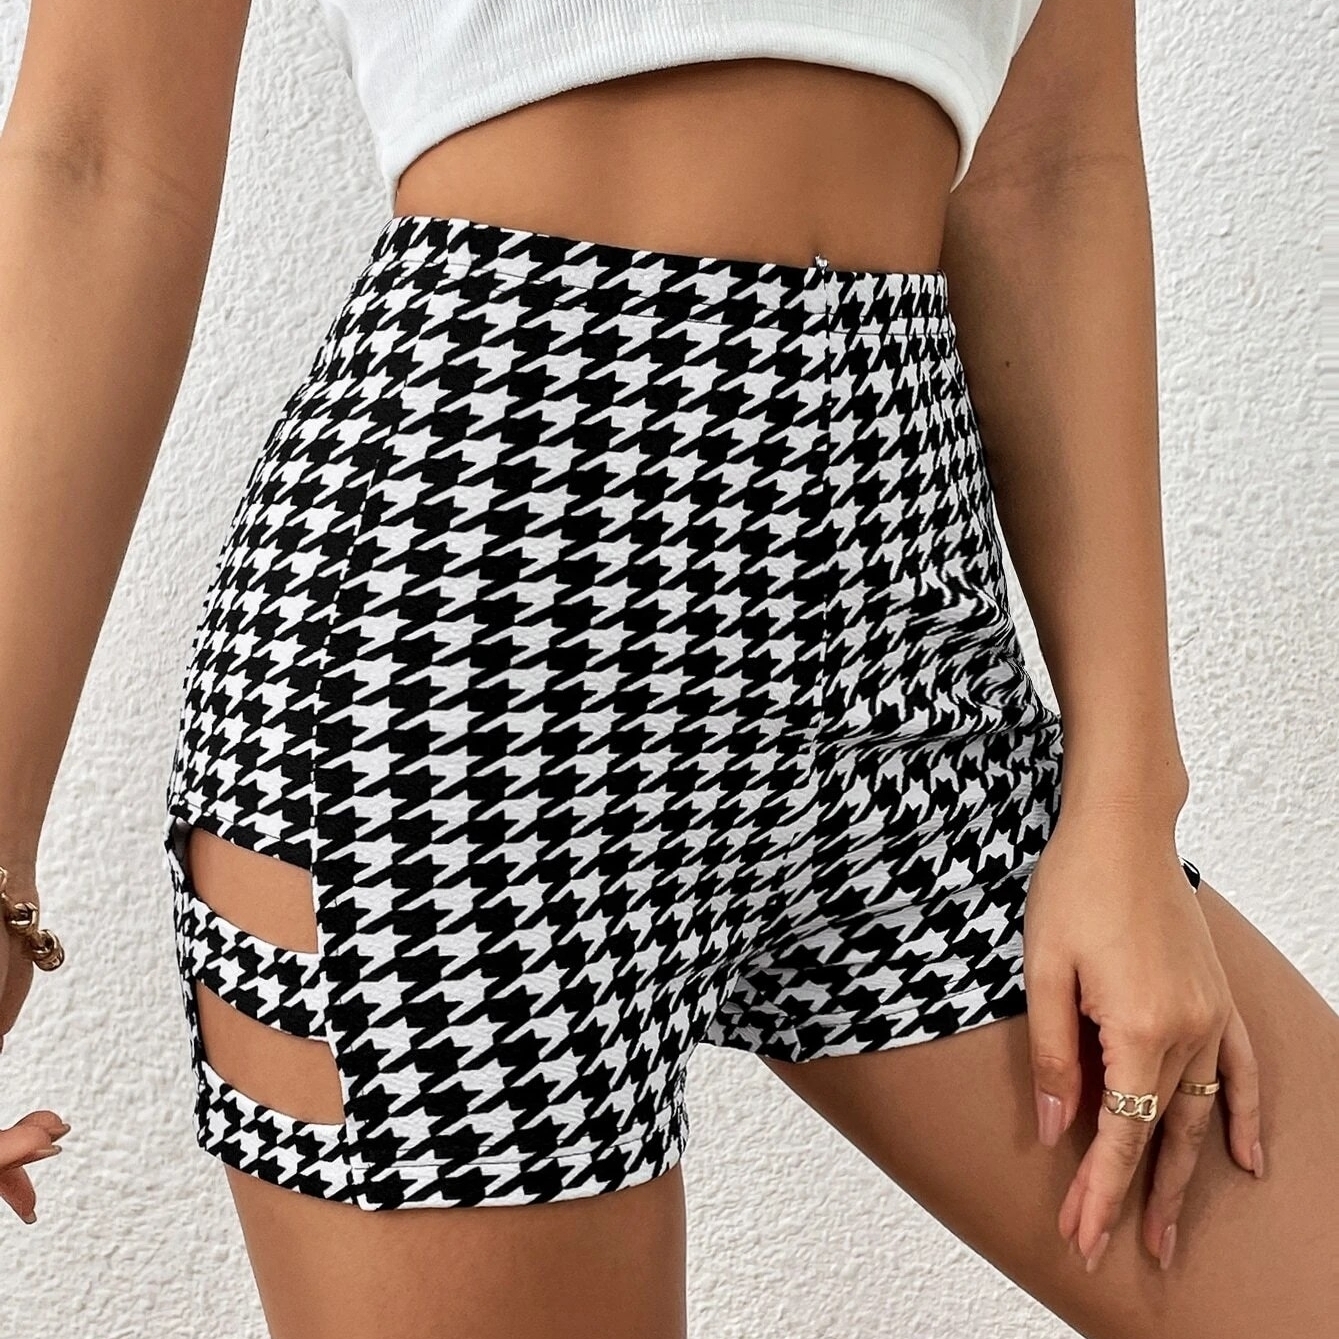 Houndstooth Print Cut Out Side Shorts - M